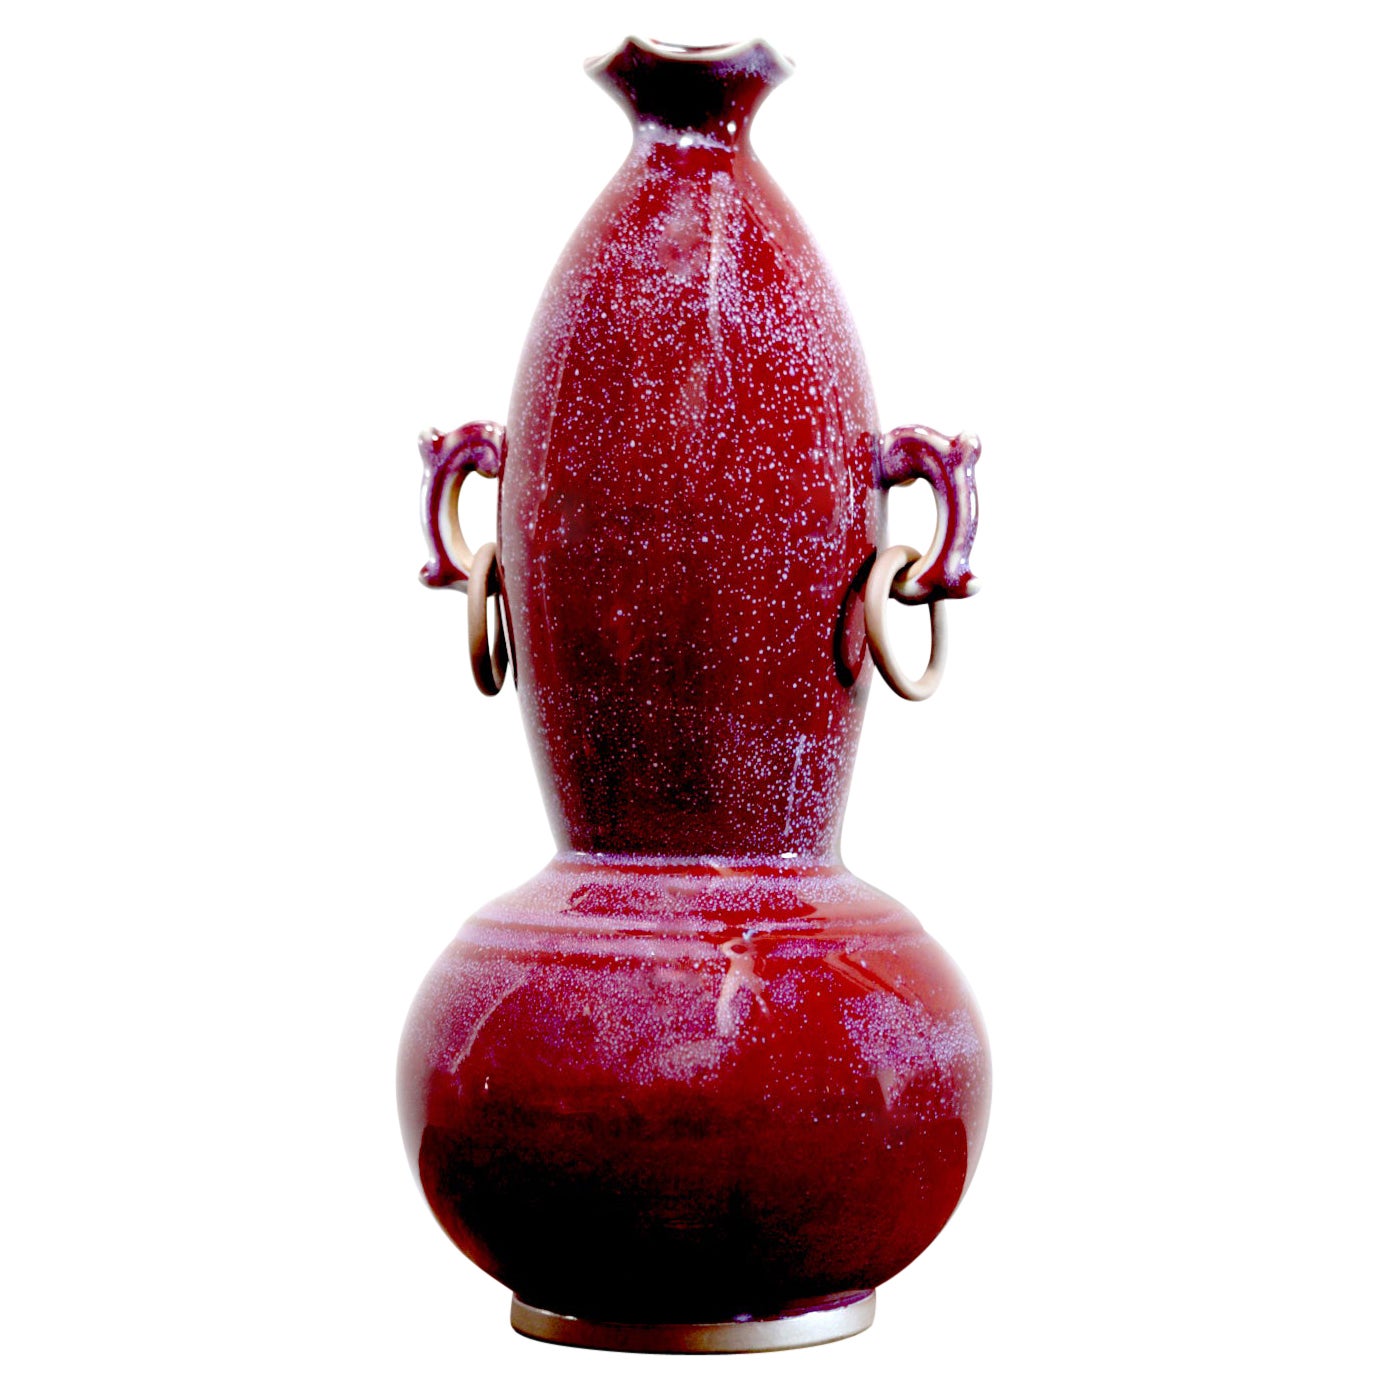 19th Century Rare Sang de Boeuf, Oxblood Gourd Vase with Ears, Copper Rings For Sale